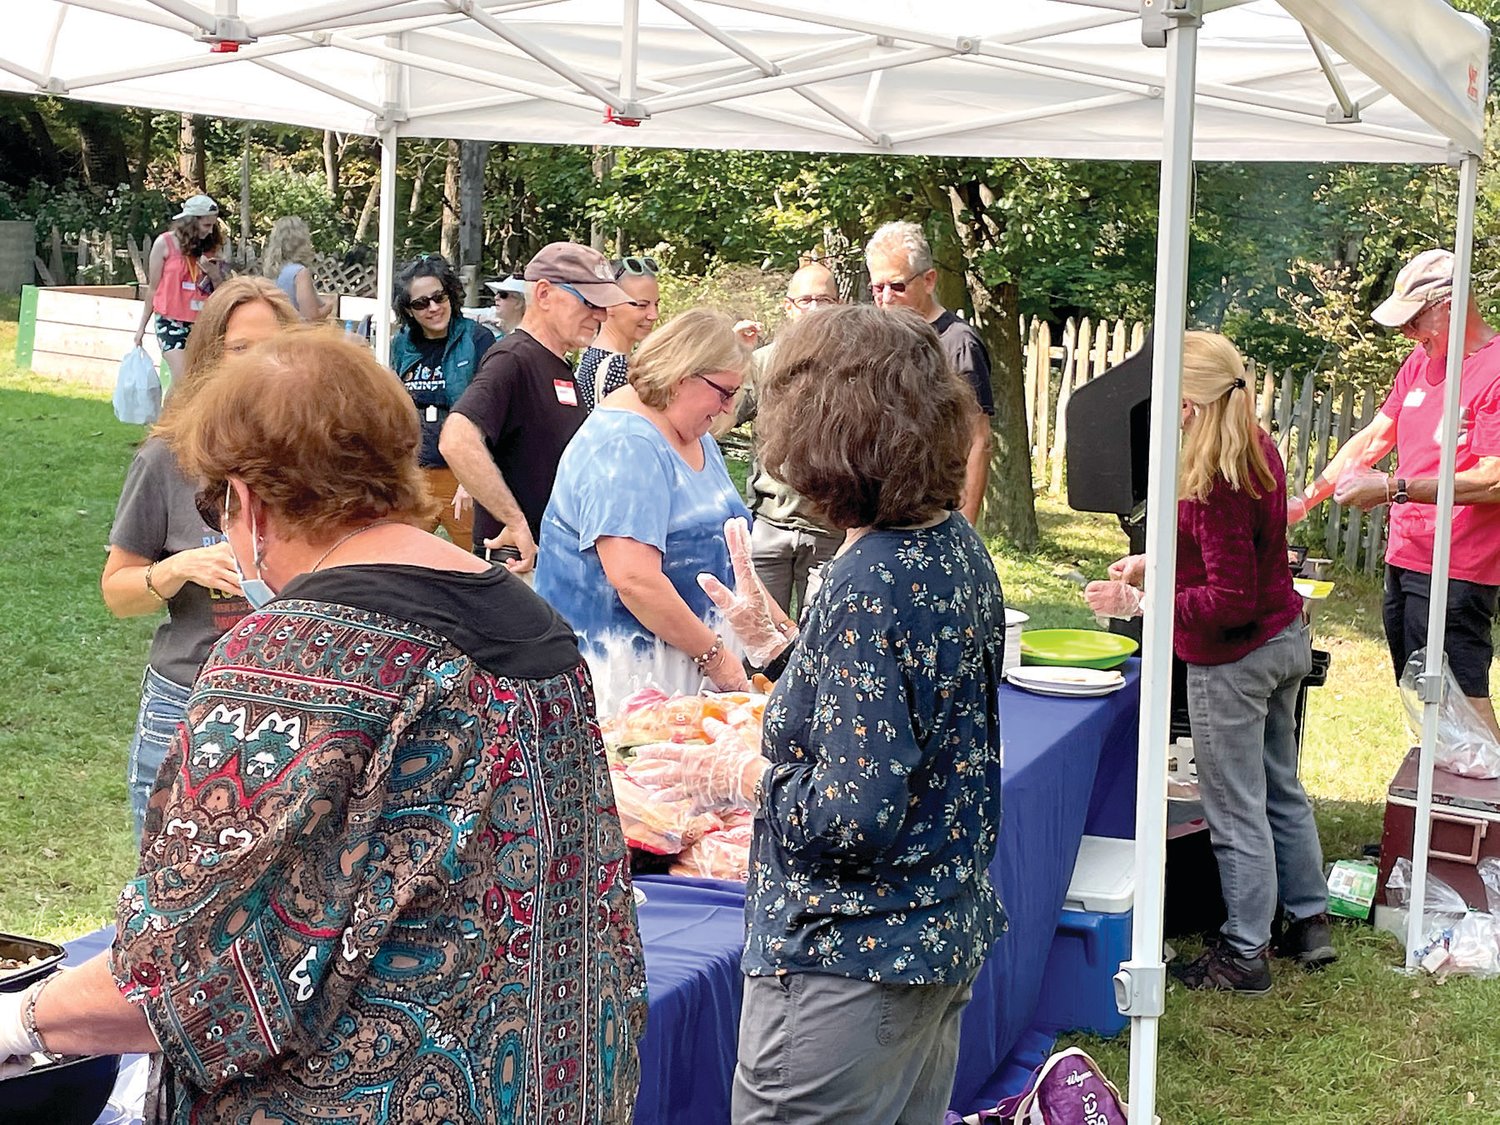 Members line up for the picnic fare of barbecue, salads and desserts.